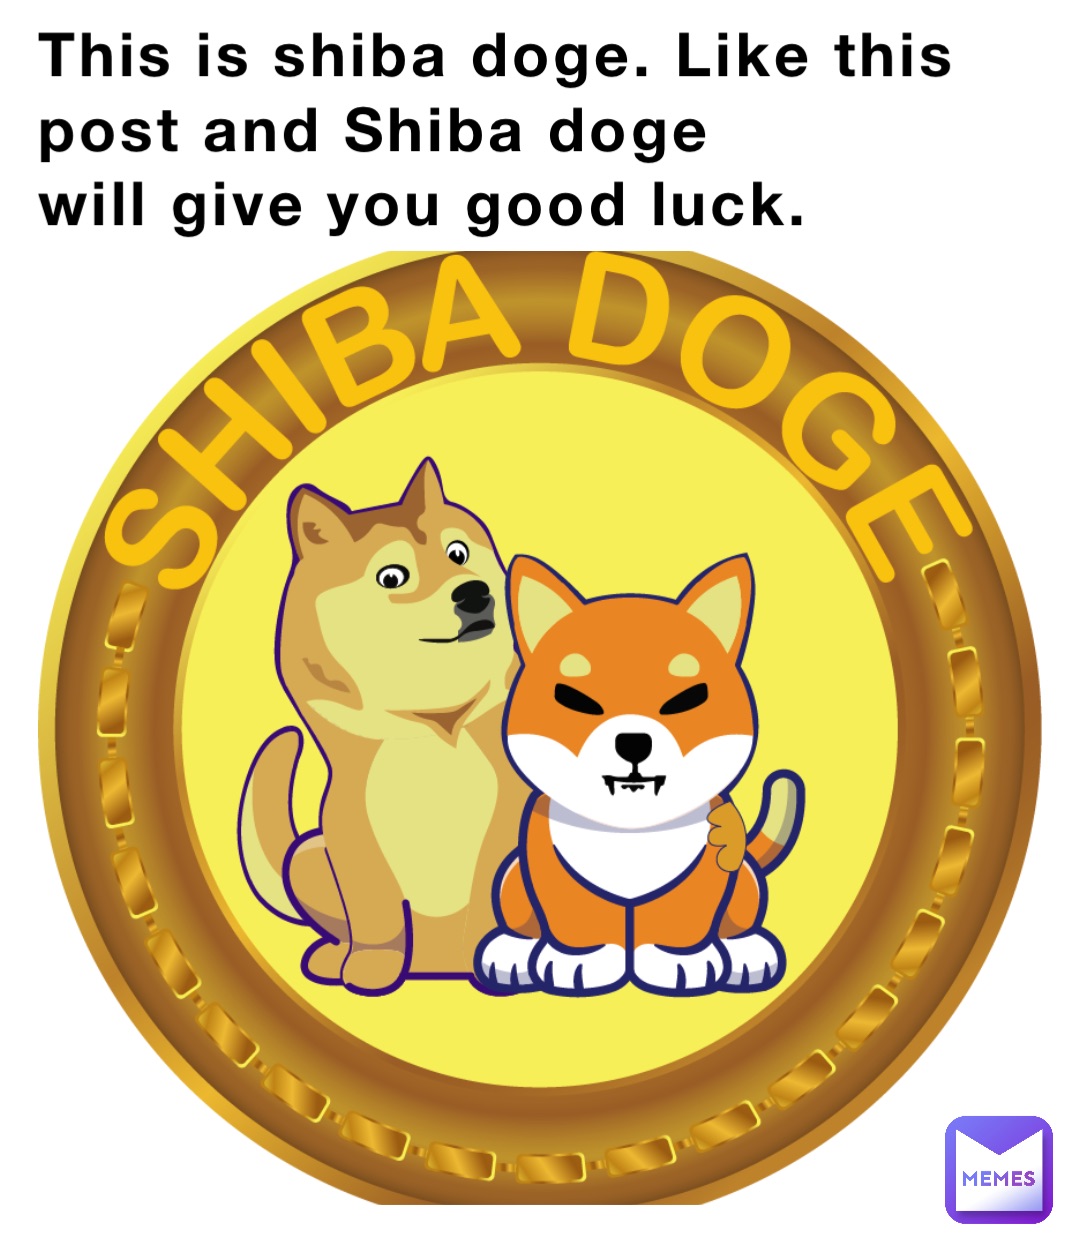 This is shiba doge. Like this 
post and Shiba doge 
will give you good luck.